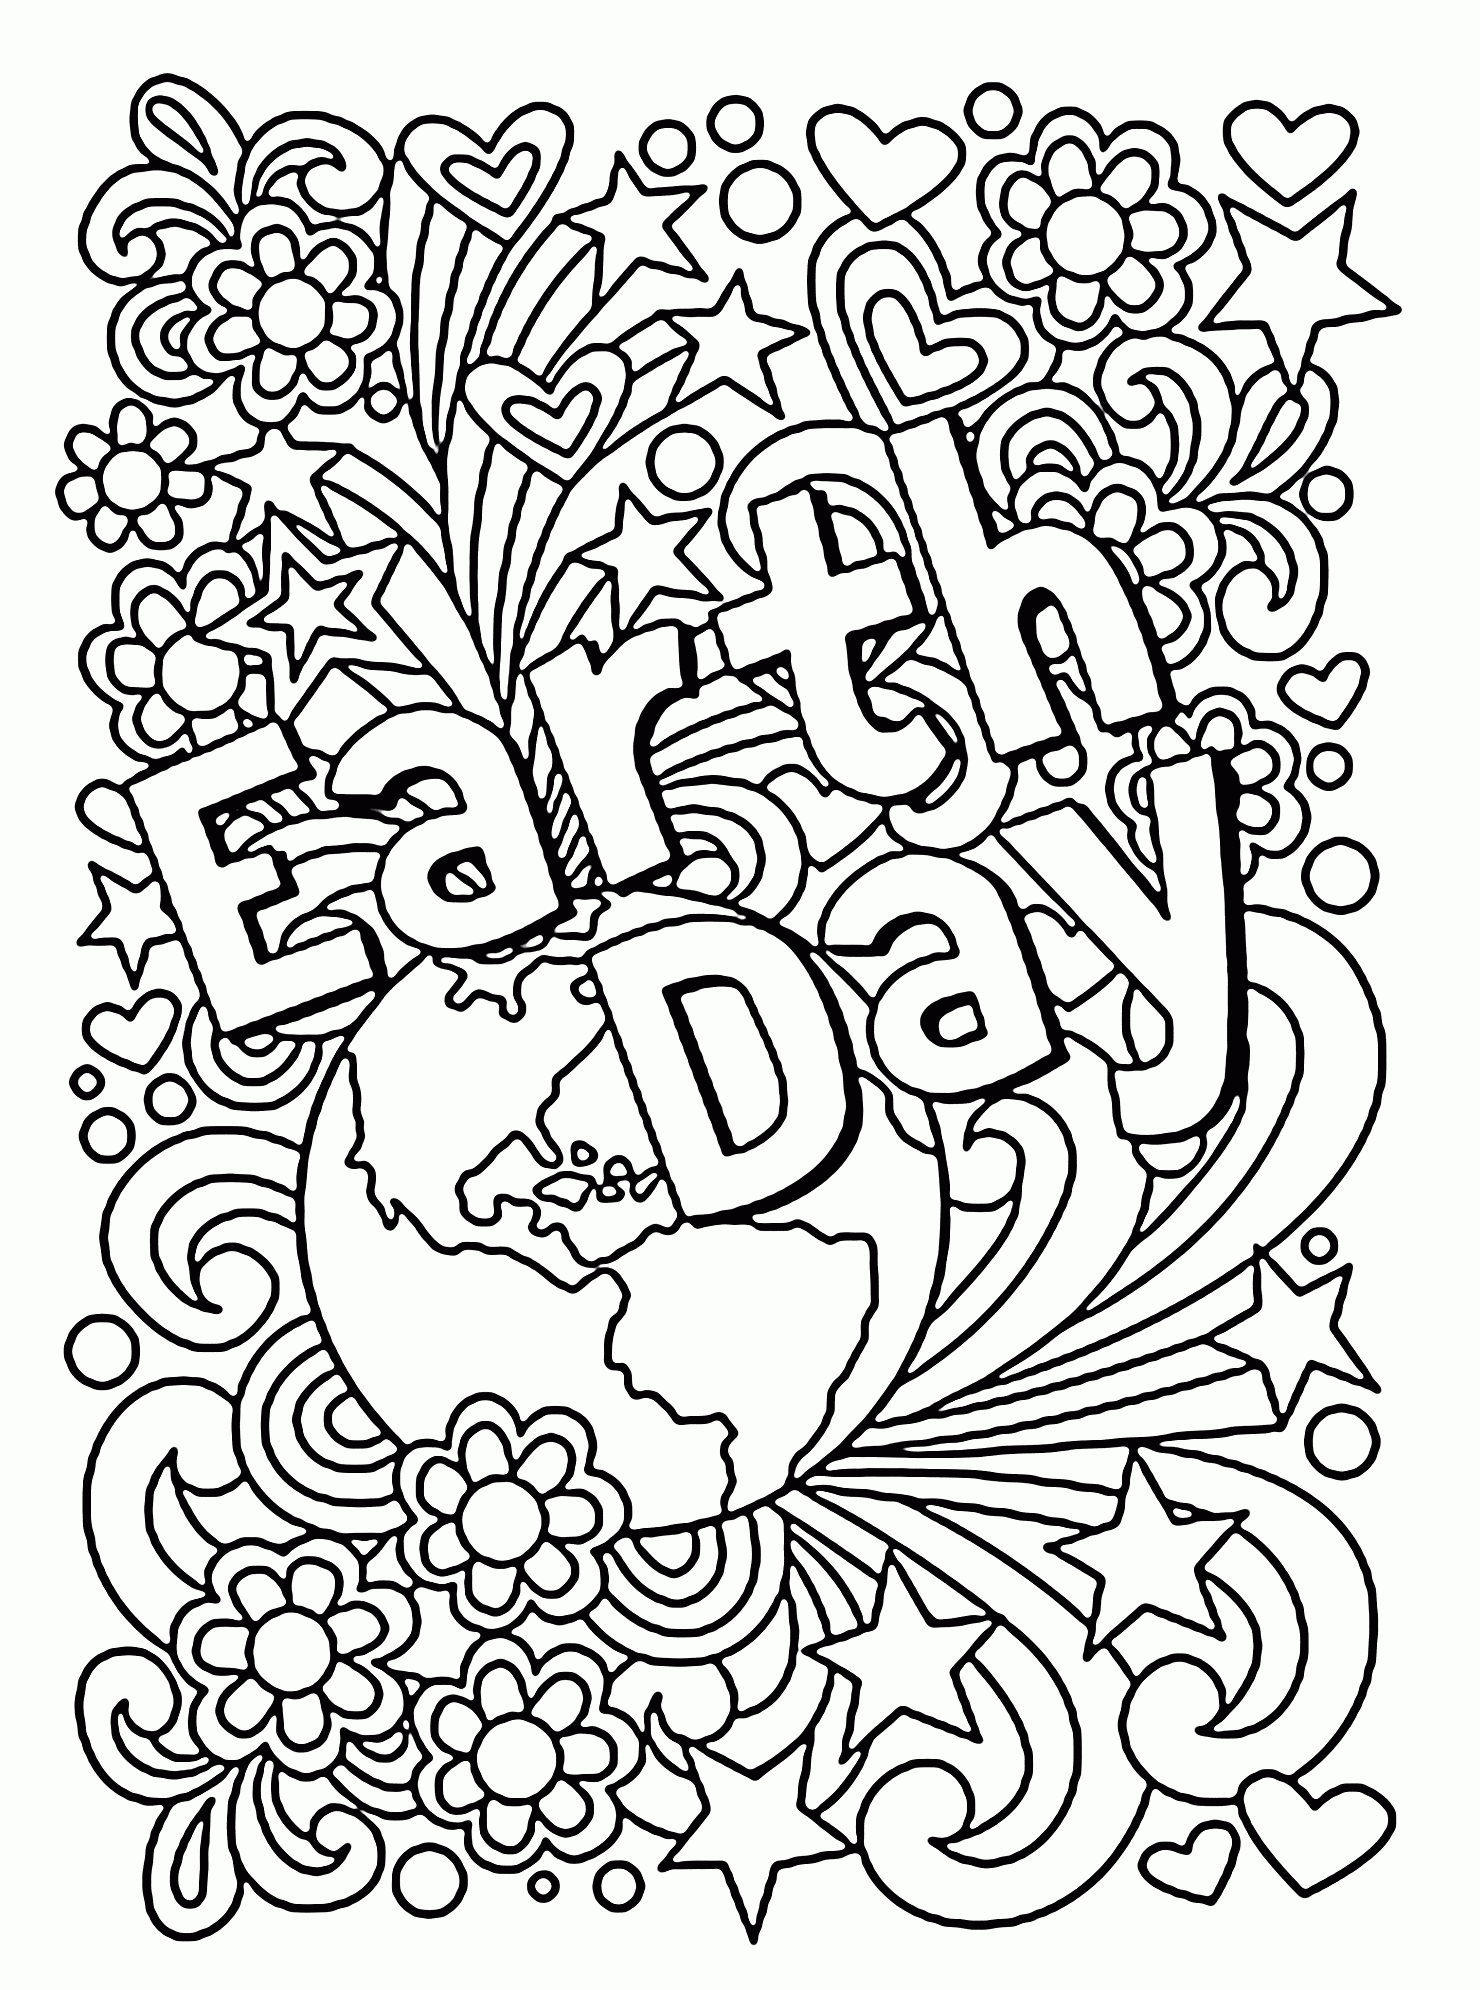 Free Printable Earth Day Coloring Pages And Activities Coloring Ideas Celebration Earth Day Coloring Page For Kids Pages